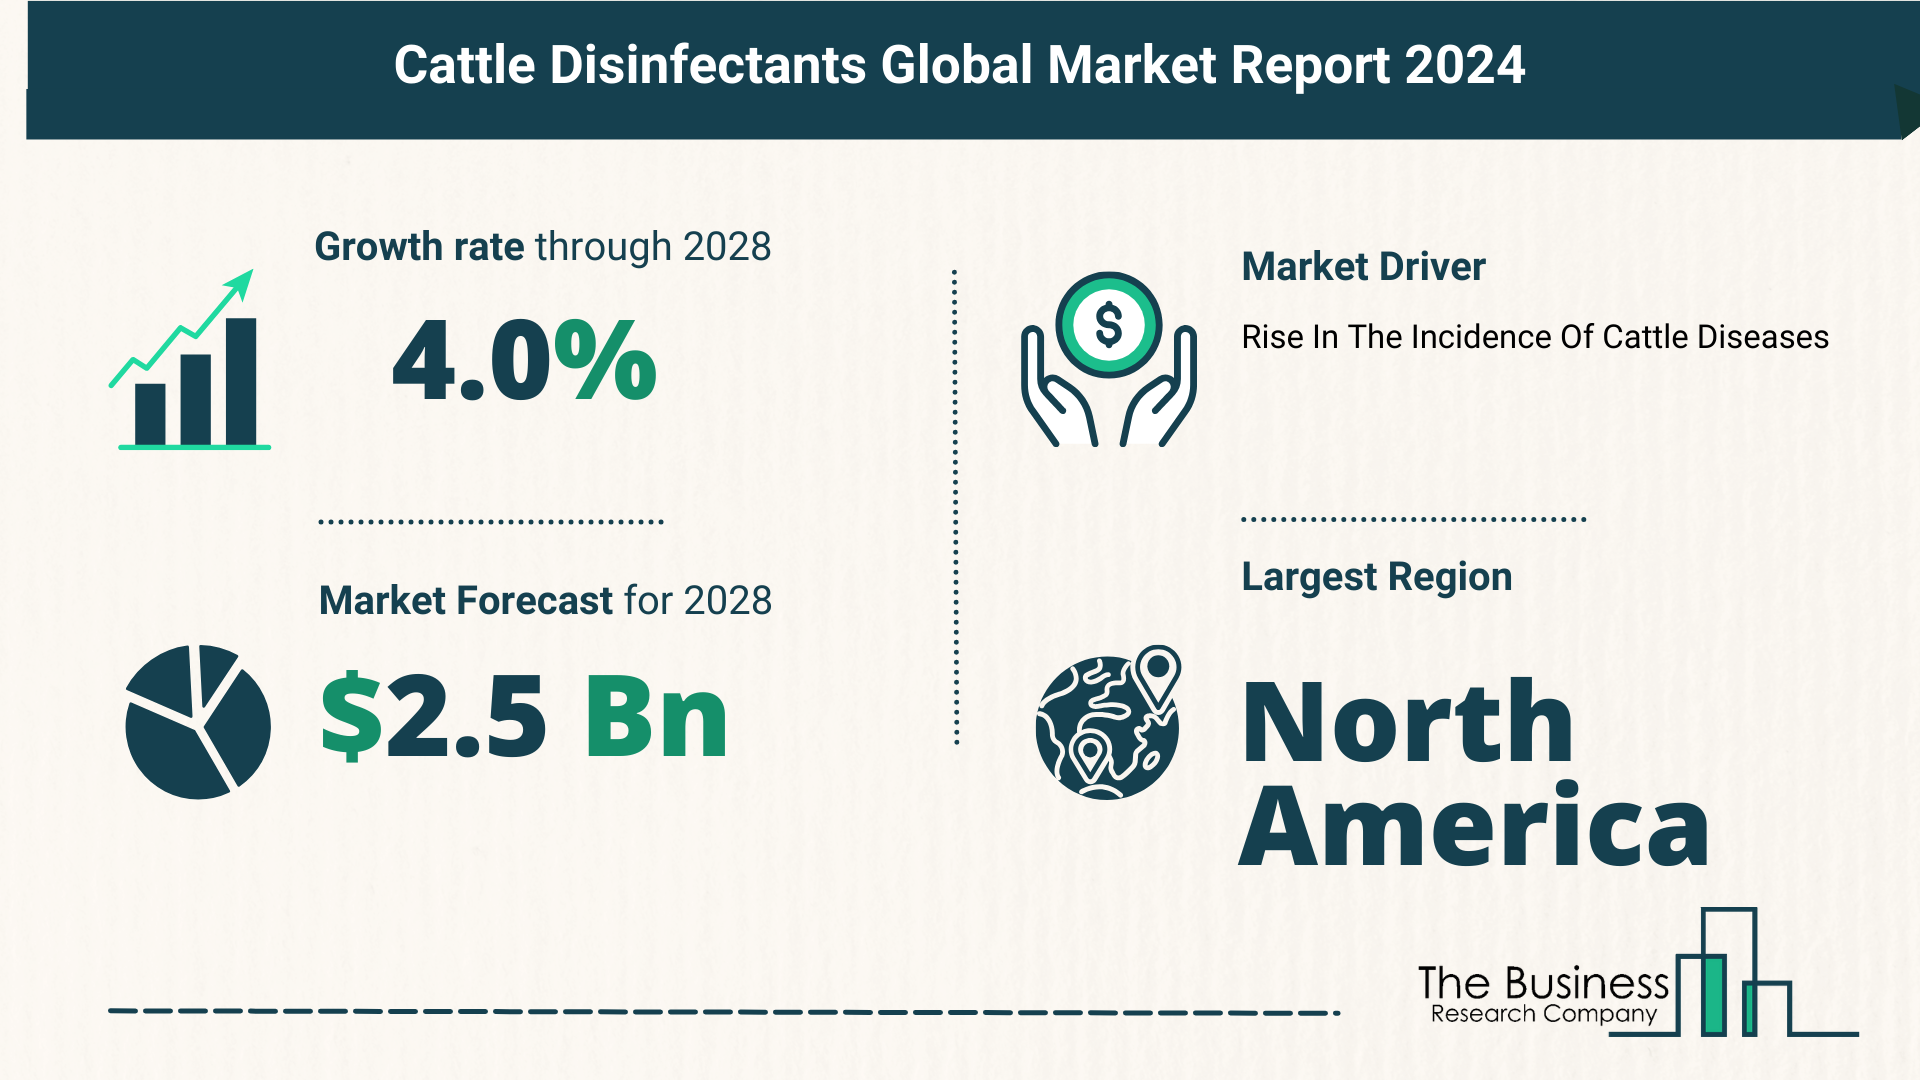 5 Key Insights On The Cattle Disinfectants Market 2024